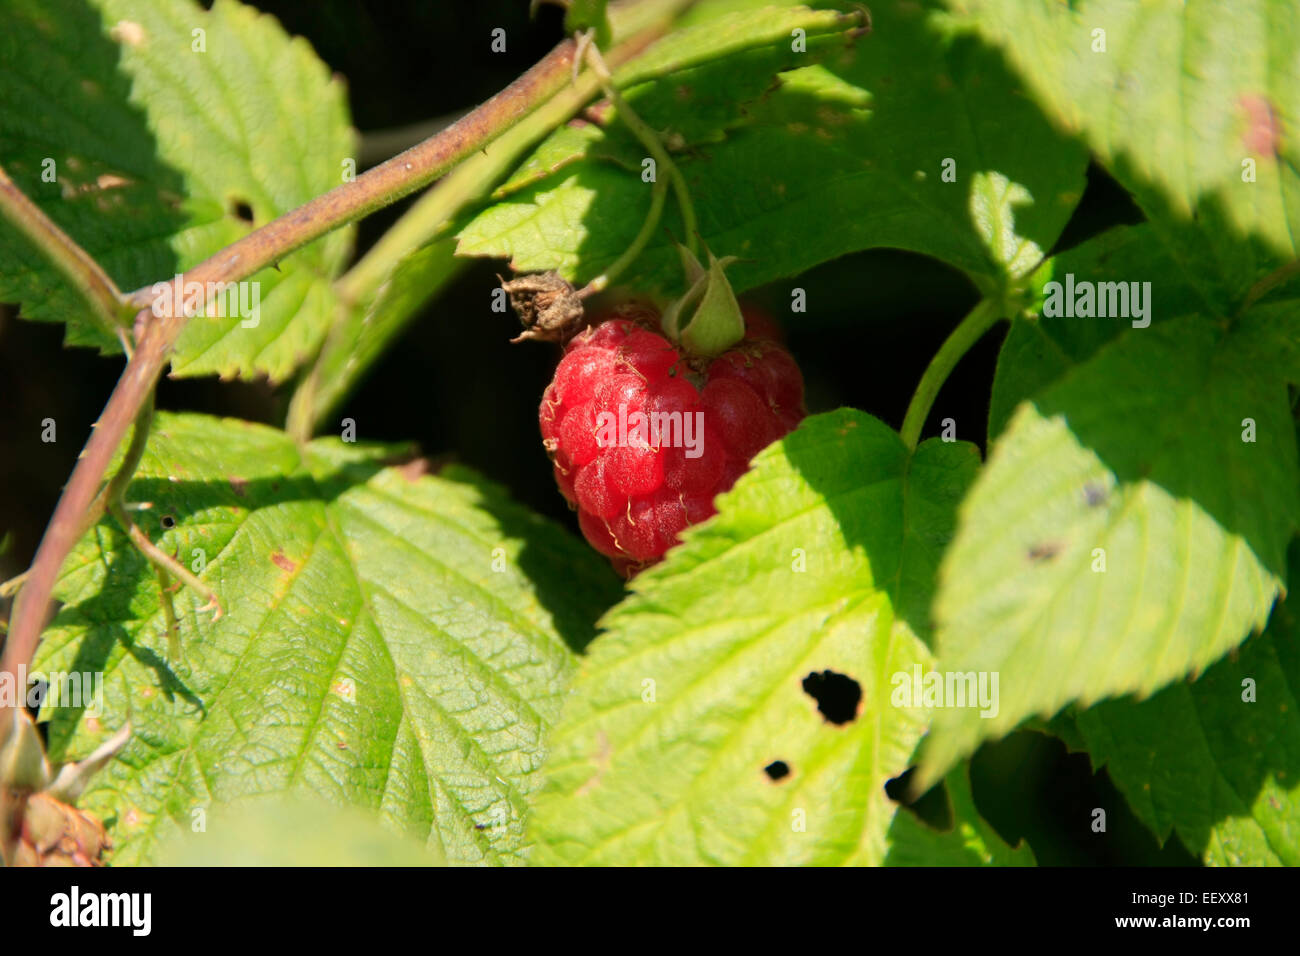 A ripe fruit of a Forest raspberry (Rubus idaeus). The ripe fruits of Forest raspberry are delicious and can be harvested from June to July. Photo: Klaus Nowottnick Date: July 24, 2014 Stock Photo